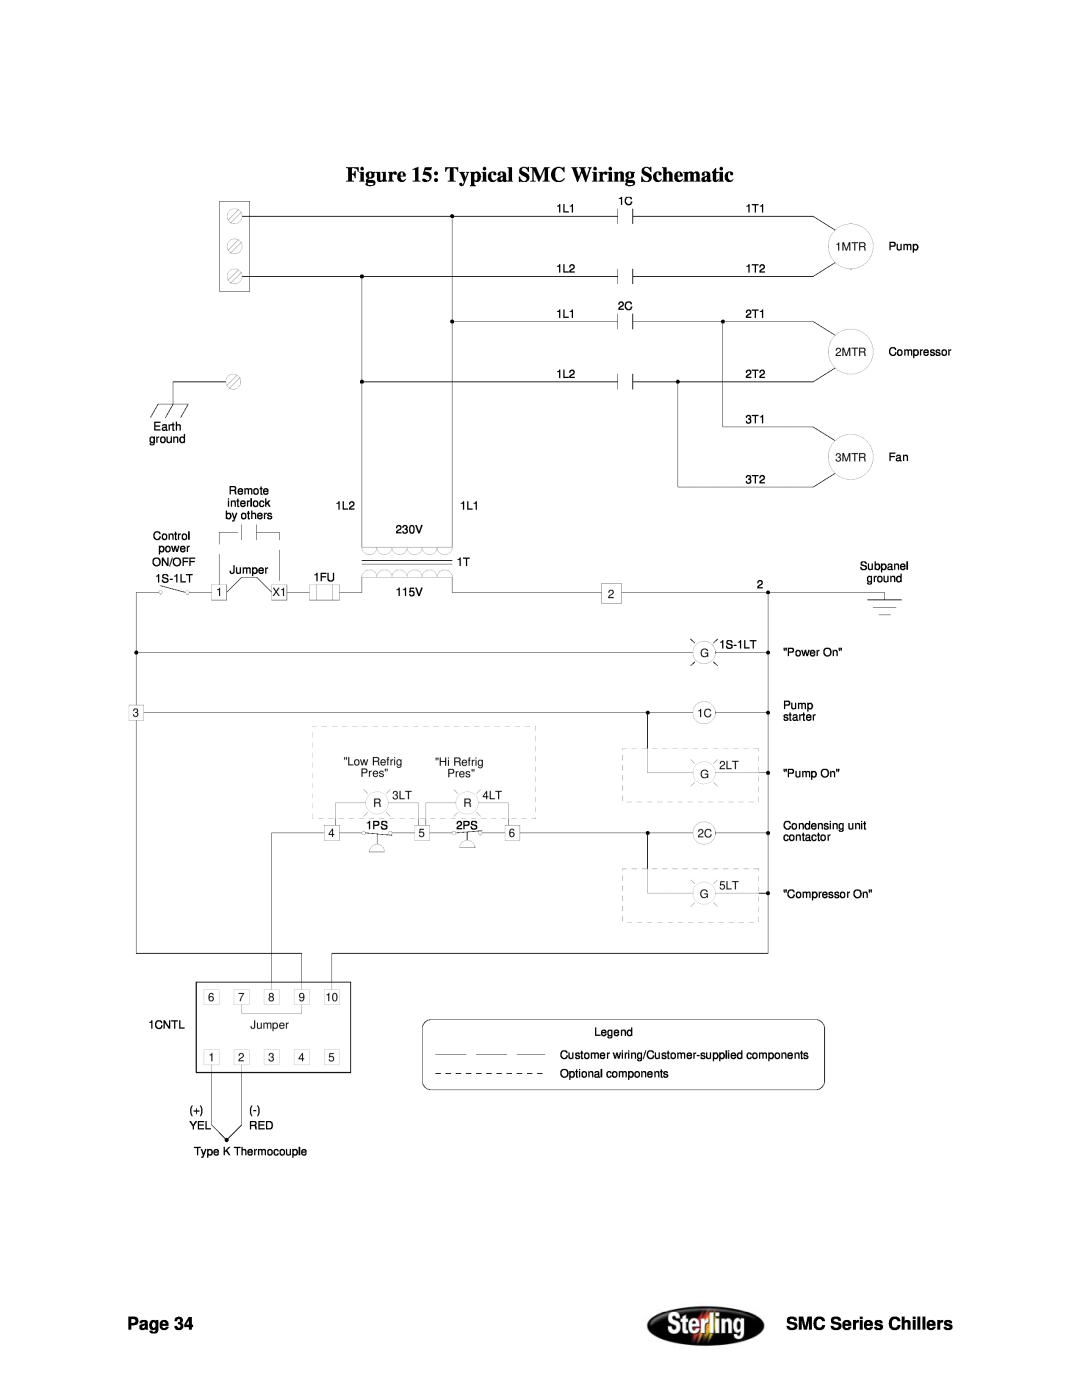 Sterling Power Products 30F to 65F installation manual Typical SMC Wiring Schematic, Page, SMC Series Chillers 